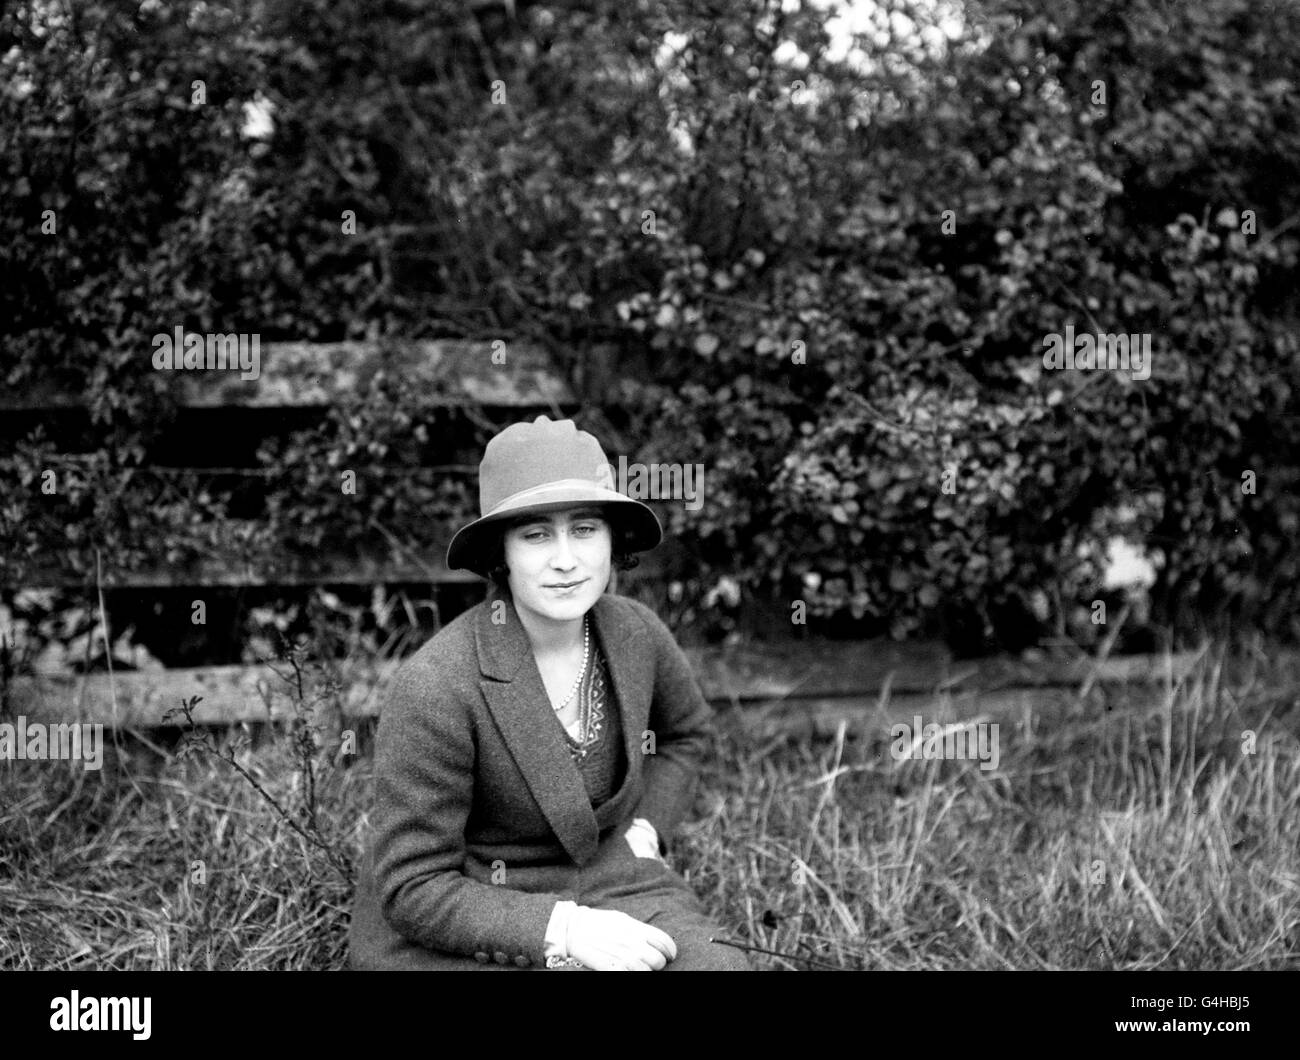 Lady Elizabeth Bowes-Lyon, later Queen Elizabeth and the Queen Mother, in her garden at St Paul's Walden. Stock Photo